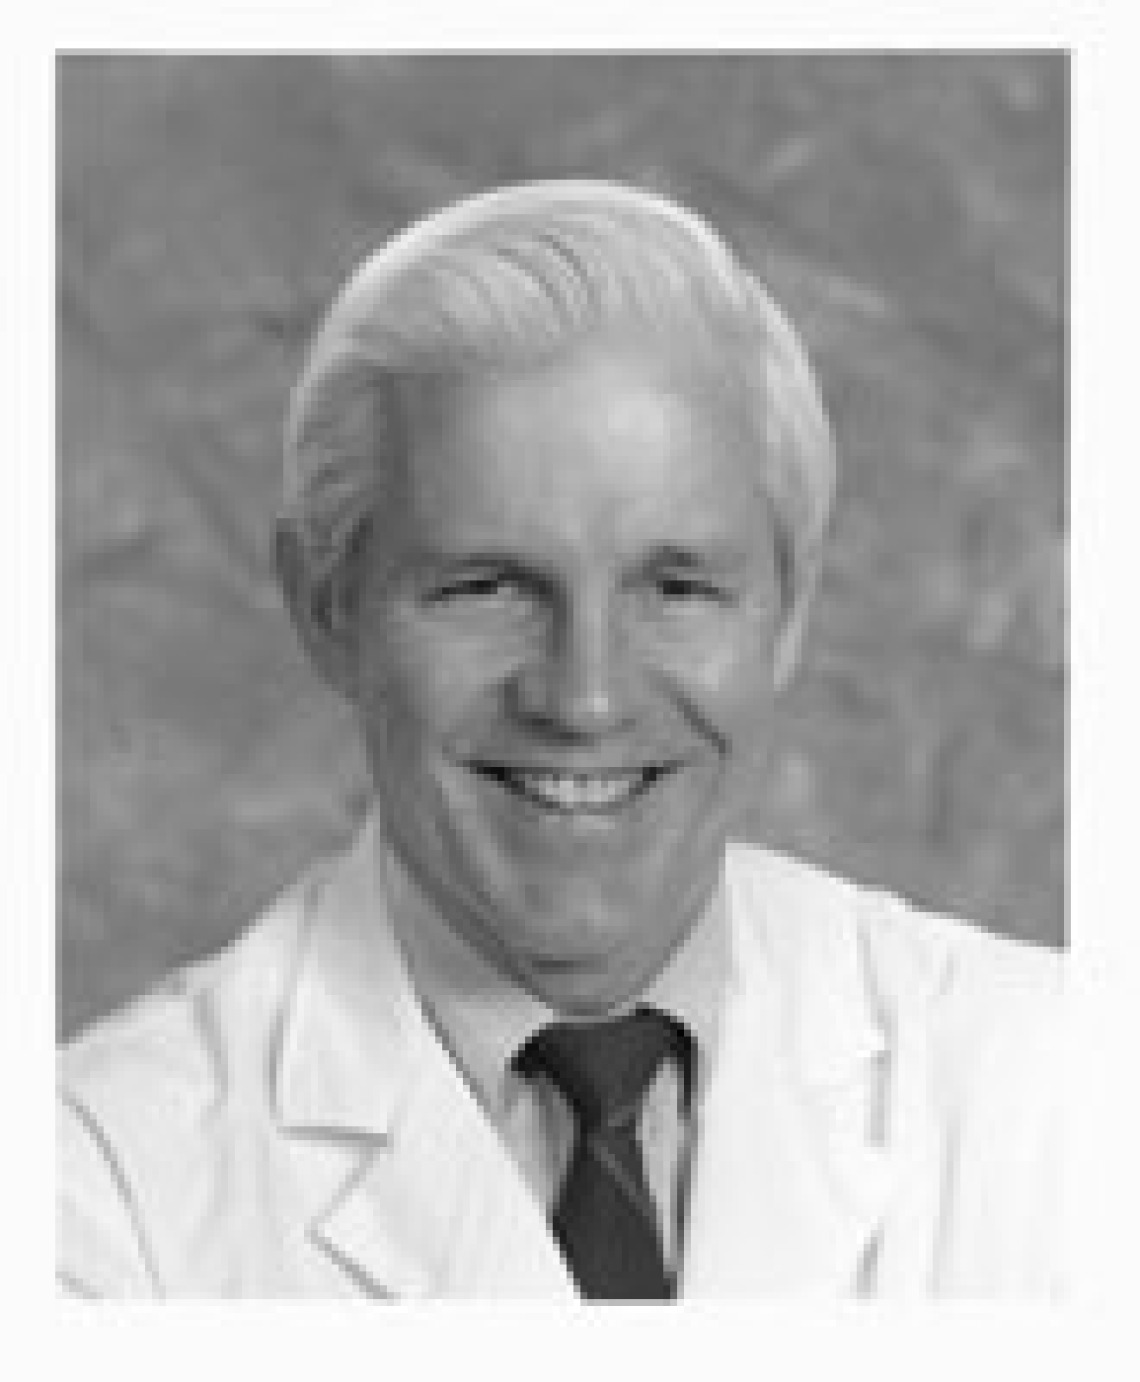 Donald P. Speer, M.D., who specialized in pediatric orthopedics and musculoskeletal oncology